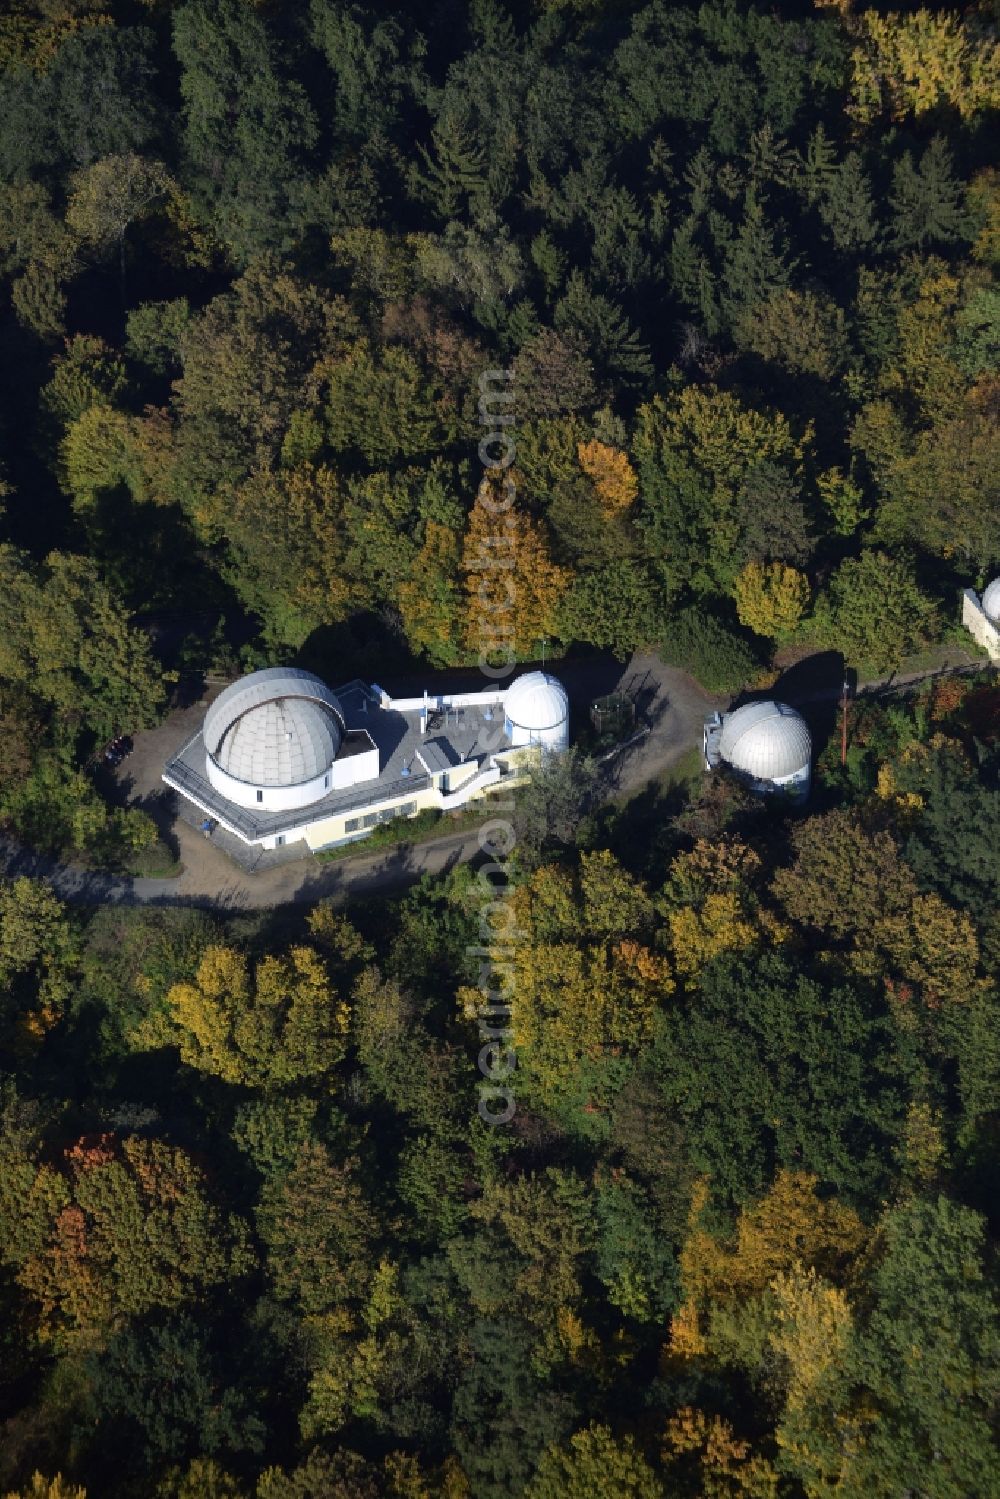 Berlin from above - Building and Observatory of the Planetarium of Wilhelm-Foerster-Sternwarte in Berlin in Germany